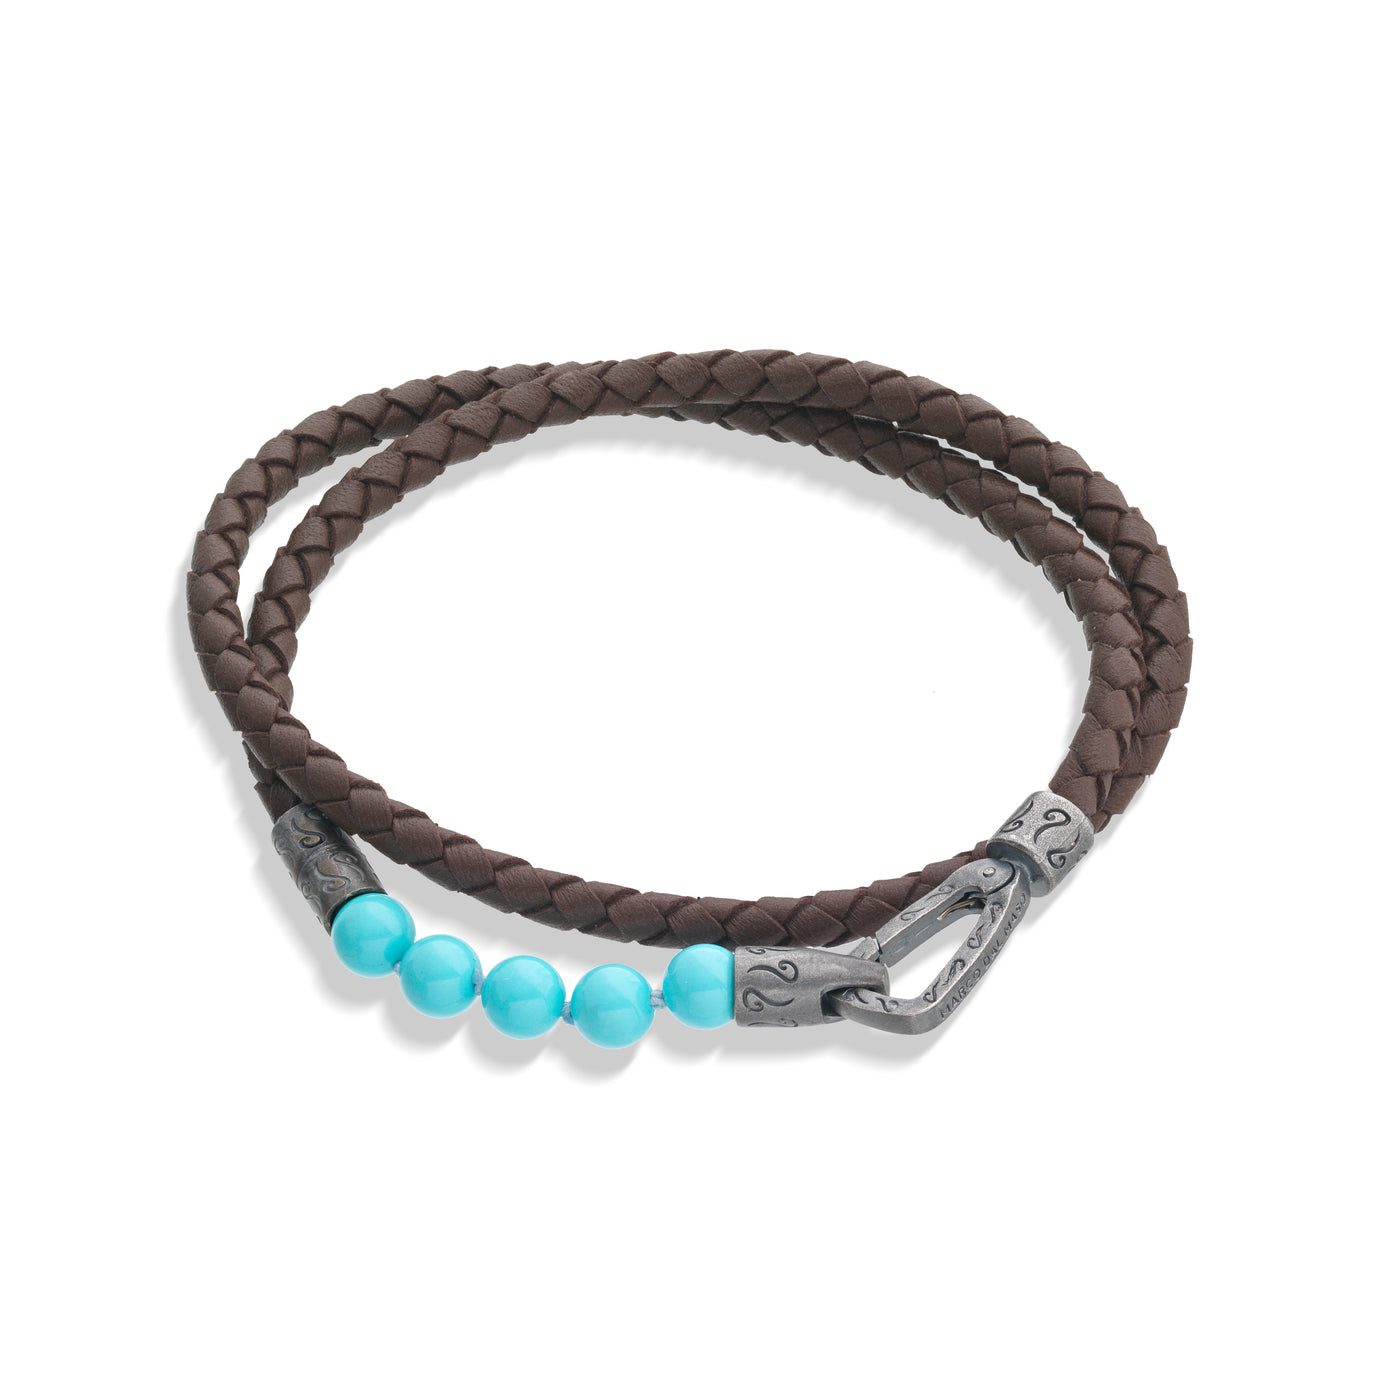 Polished 6mm Turquoise Double Wrap Brown Leather Bracelet